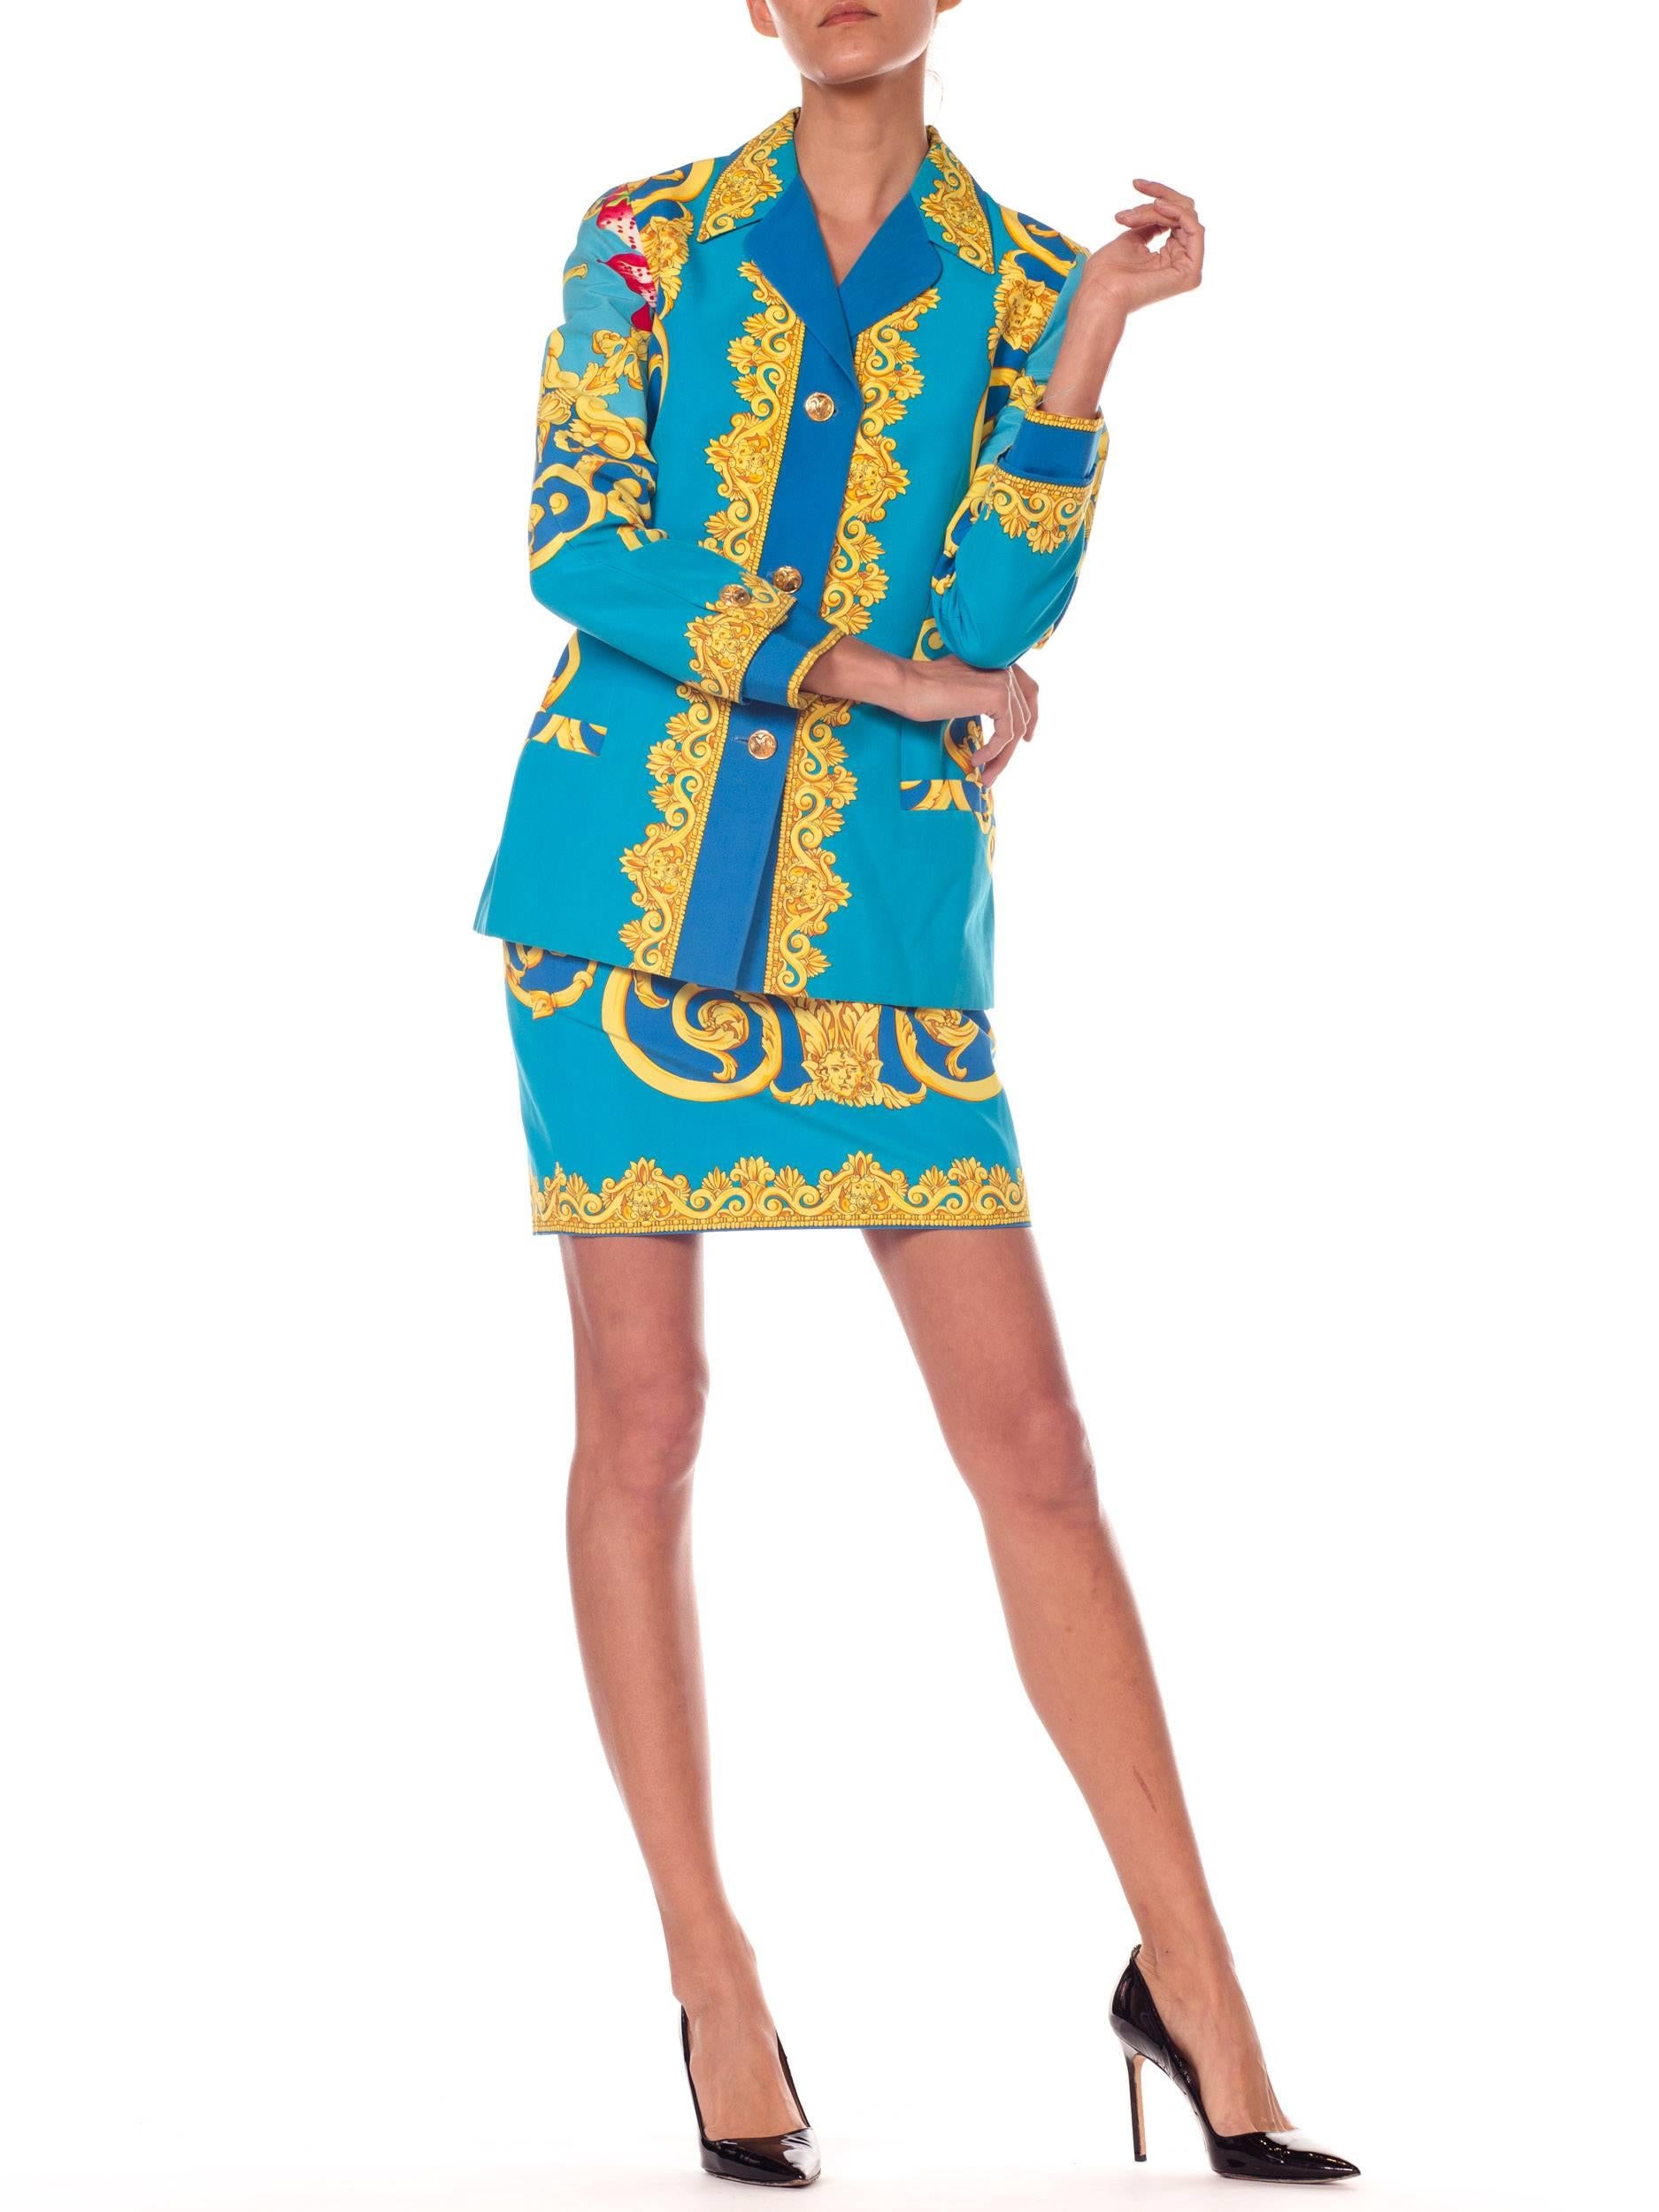 Blue 1990S GIANNI VERSACE Istante Cotton Baroque Floral Printed Skirt Suit With Gold For Sale